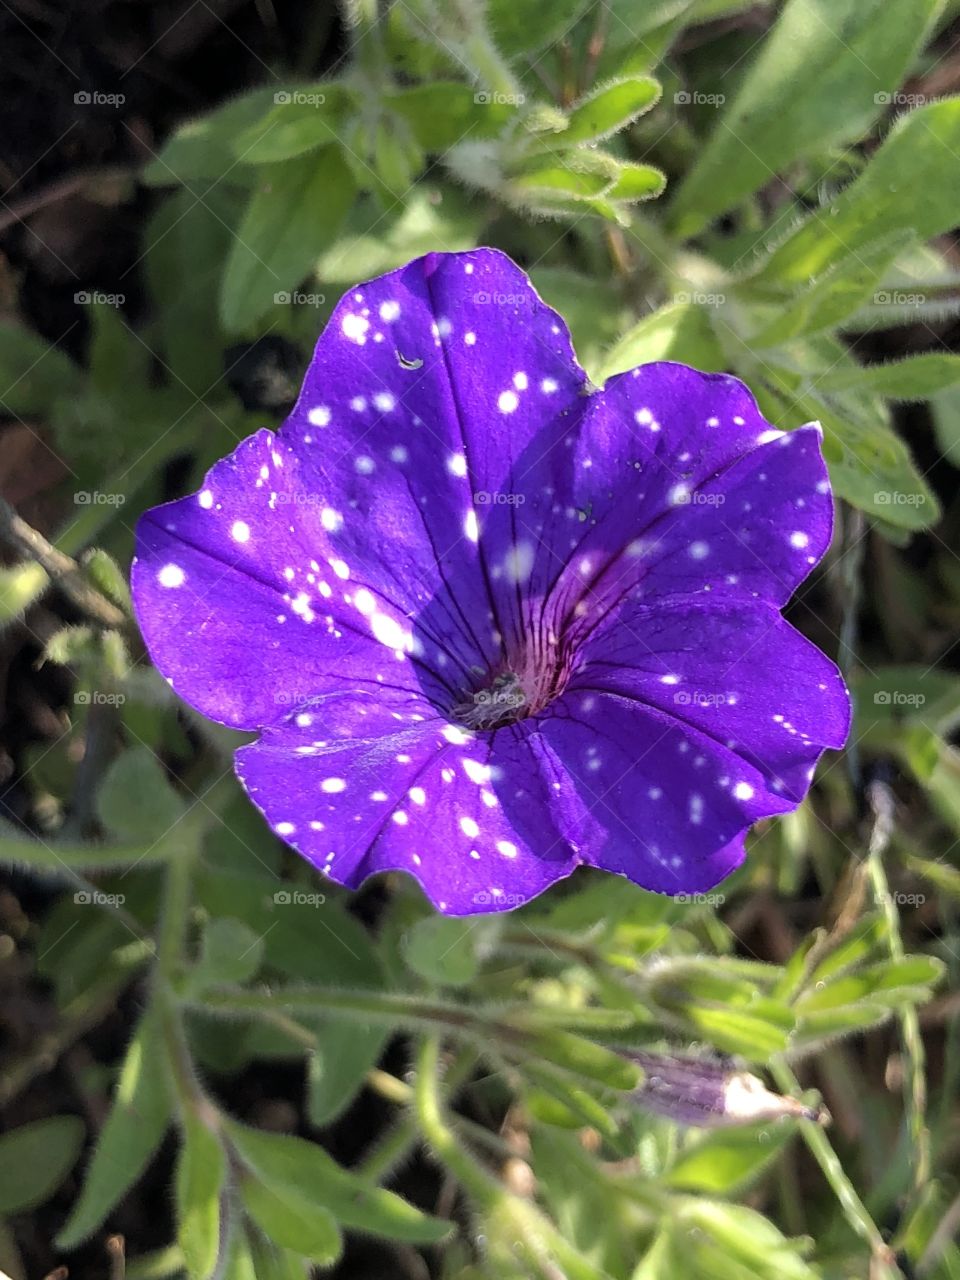 Spotted flower